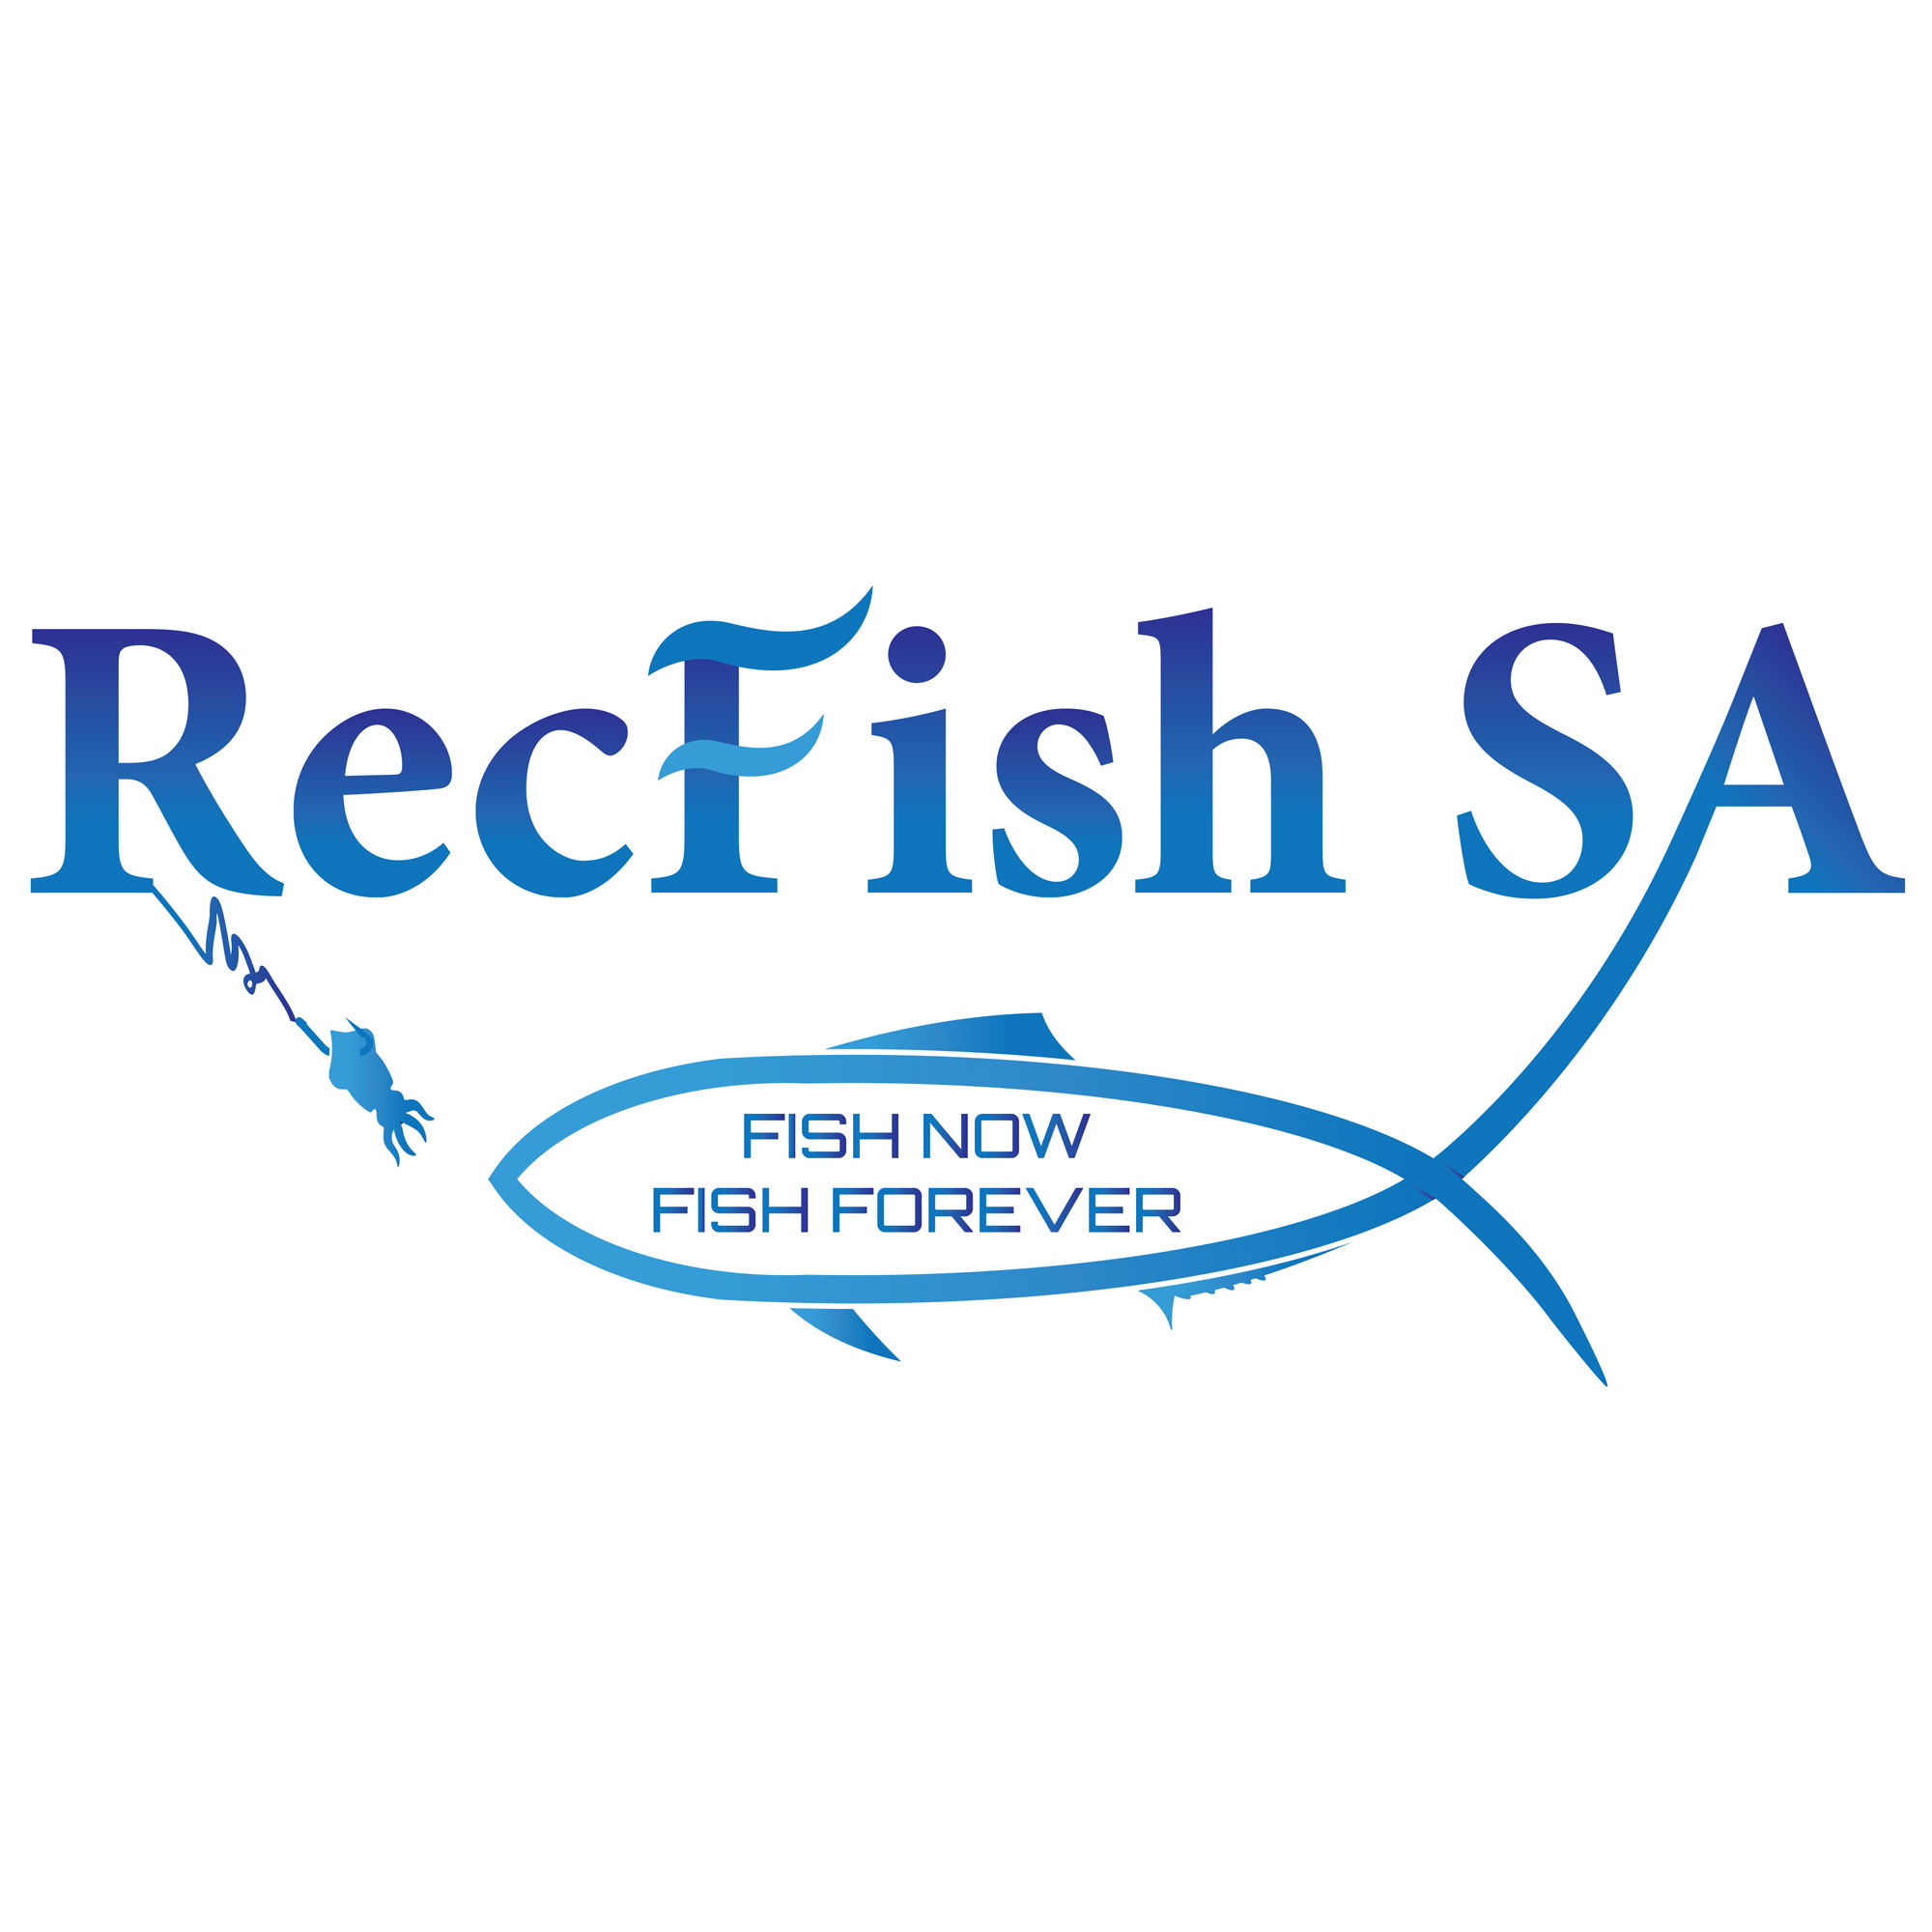 Achievements and contributions - RecFish SA